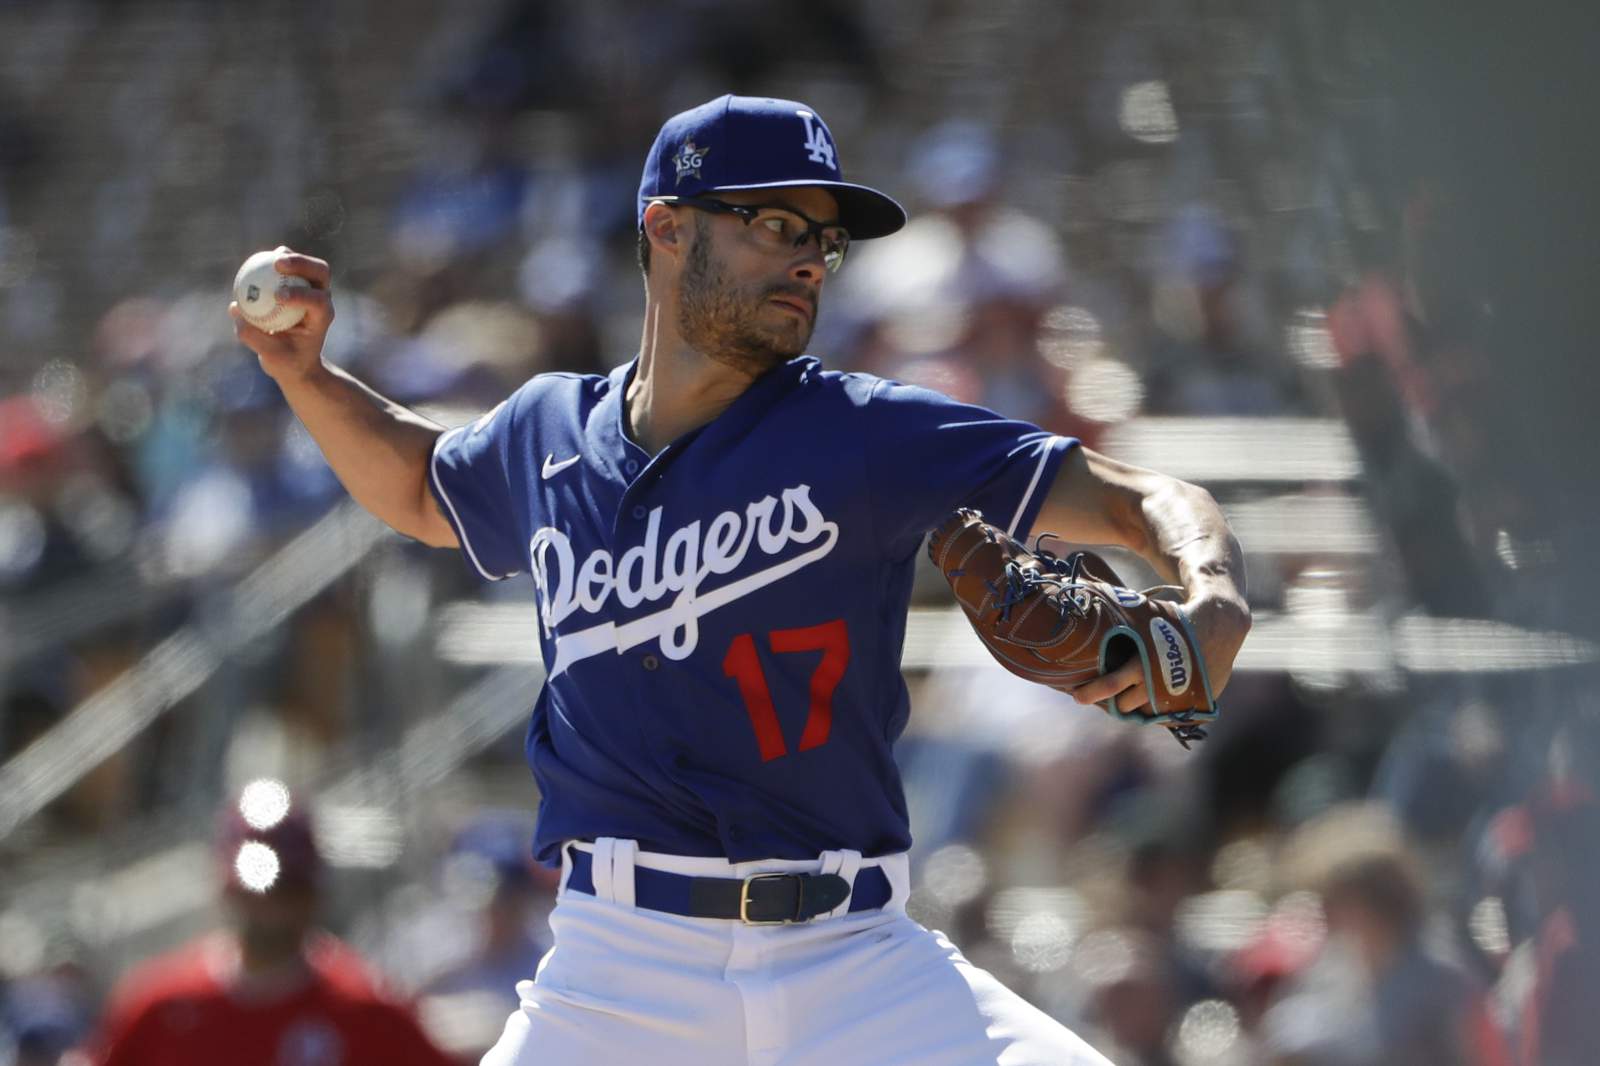 Meet Joe Kelly, Dodgers pitcher suspended for inappropriate actions during Astros matchup